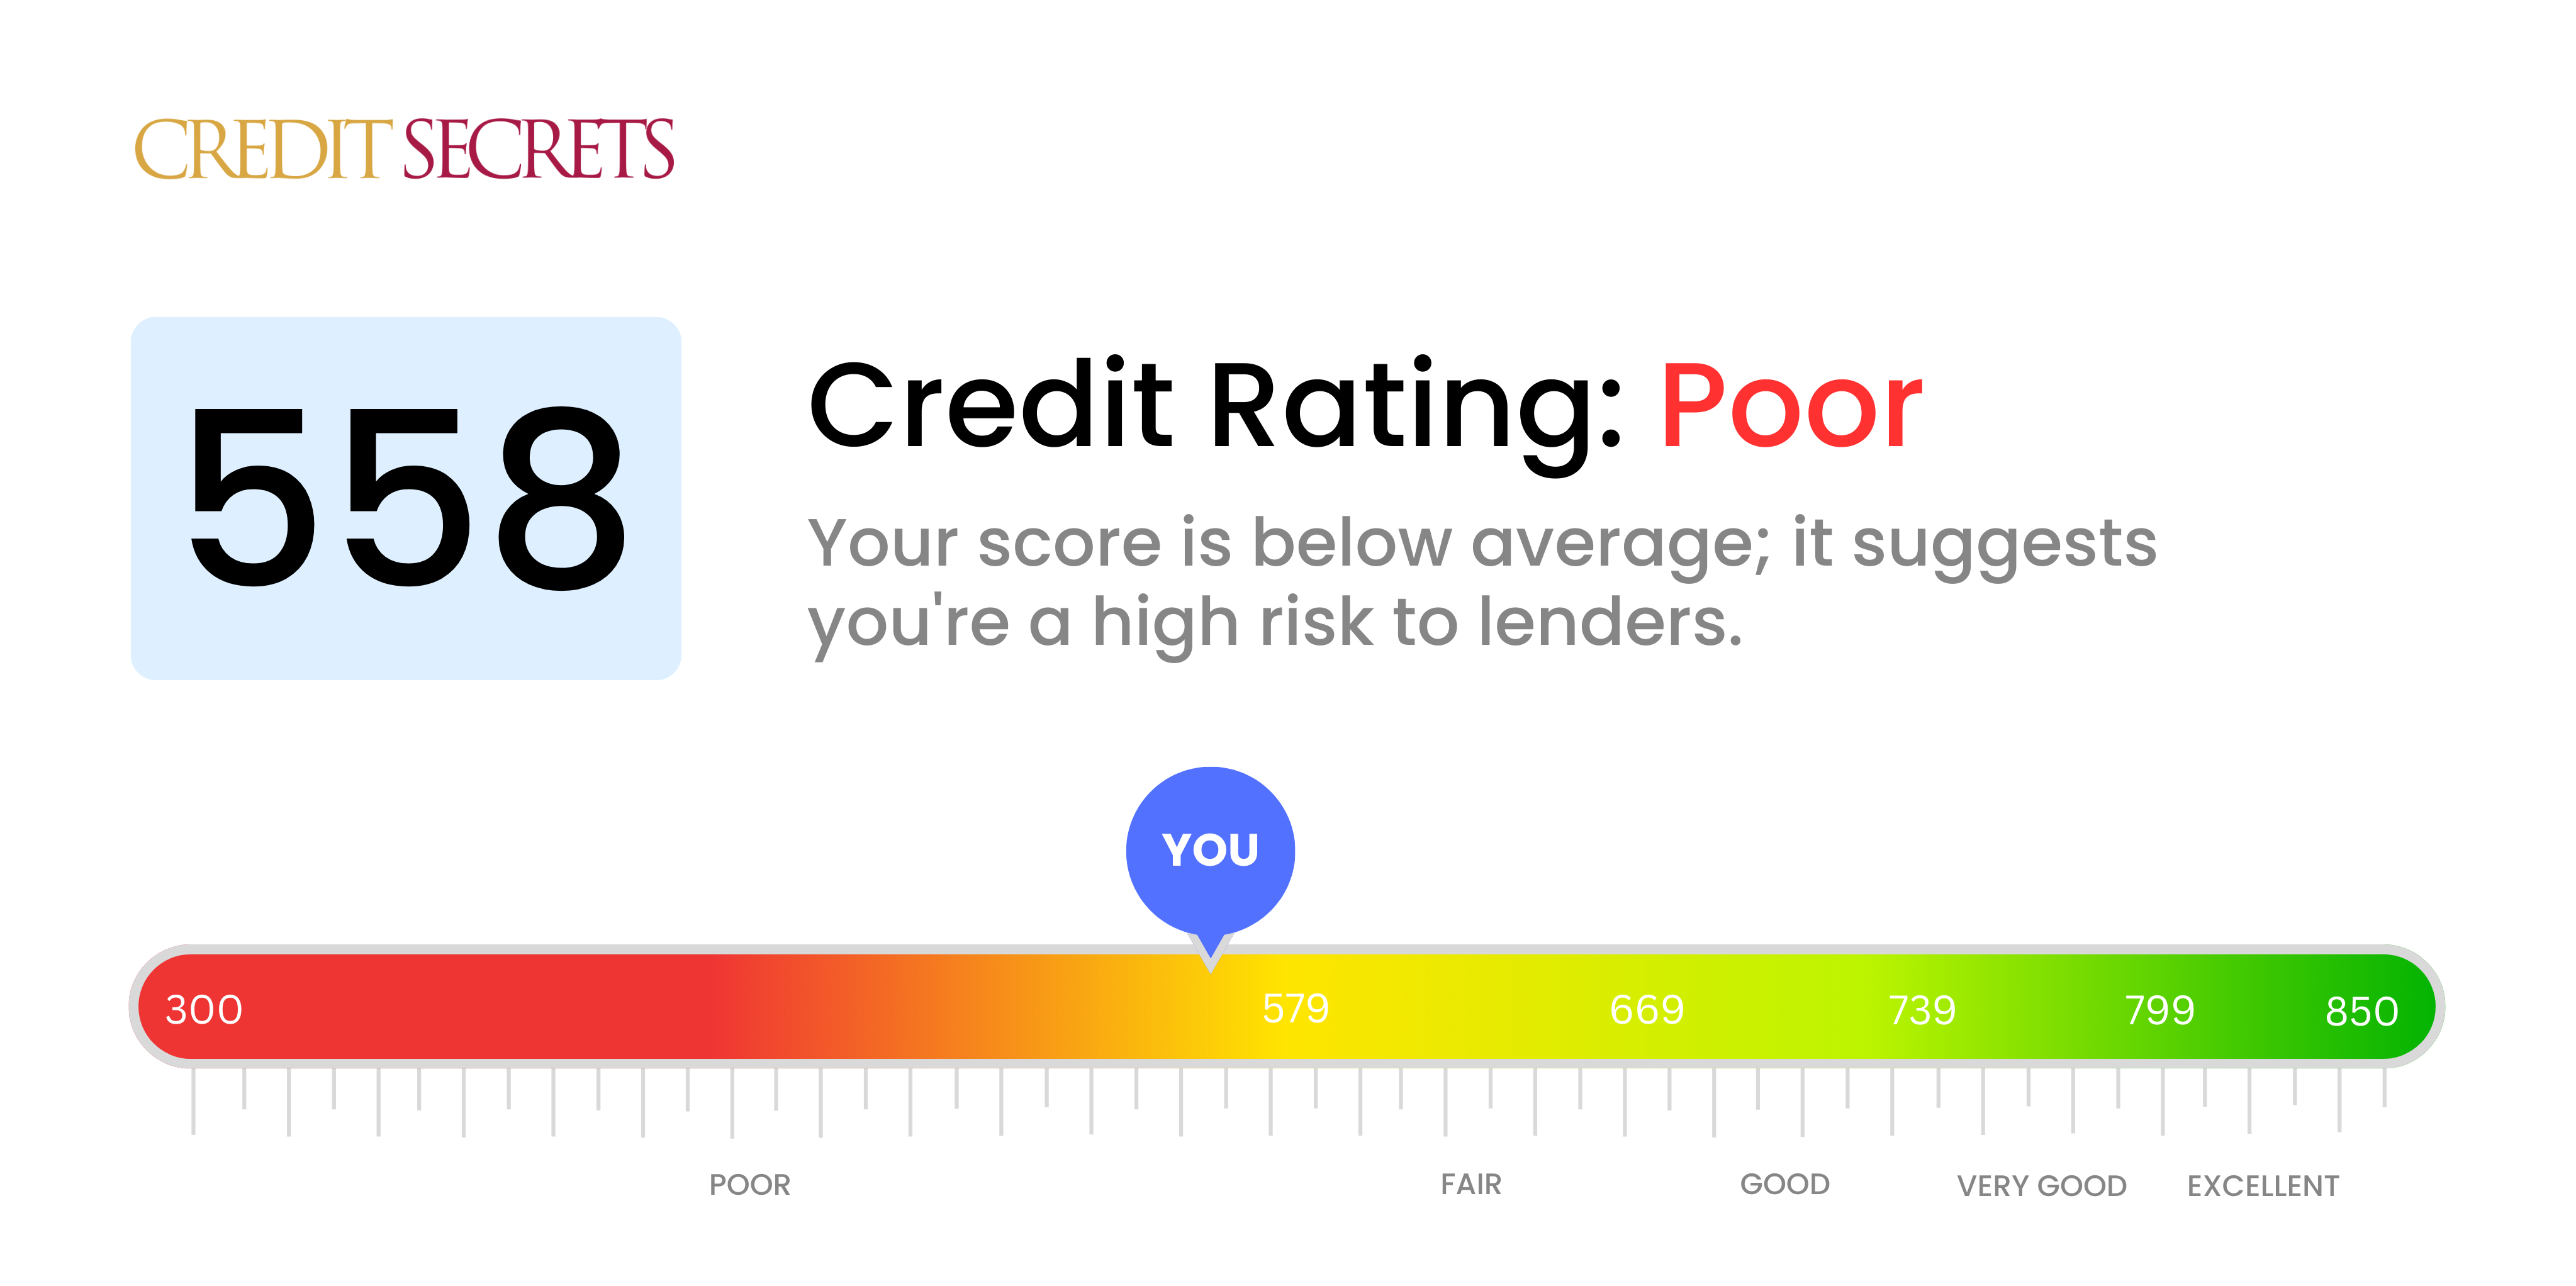 Is 558 a good credit score?